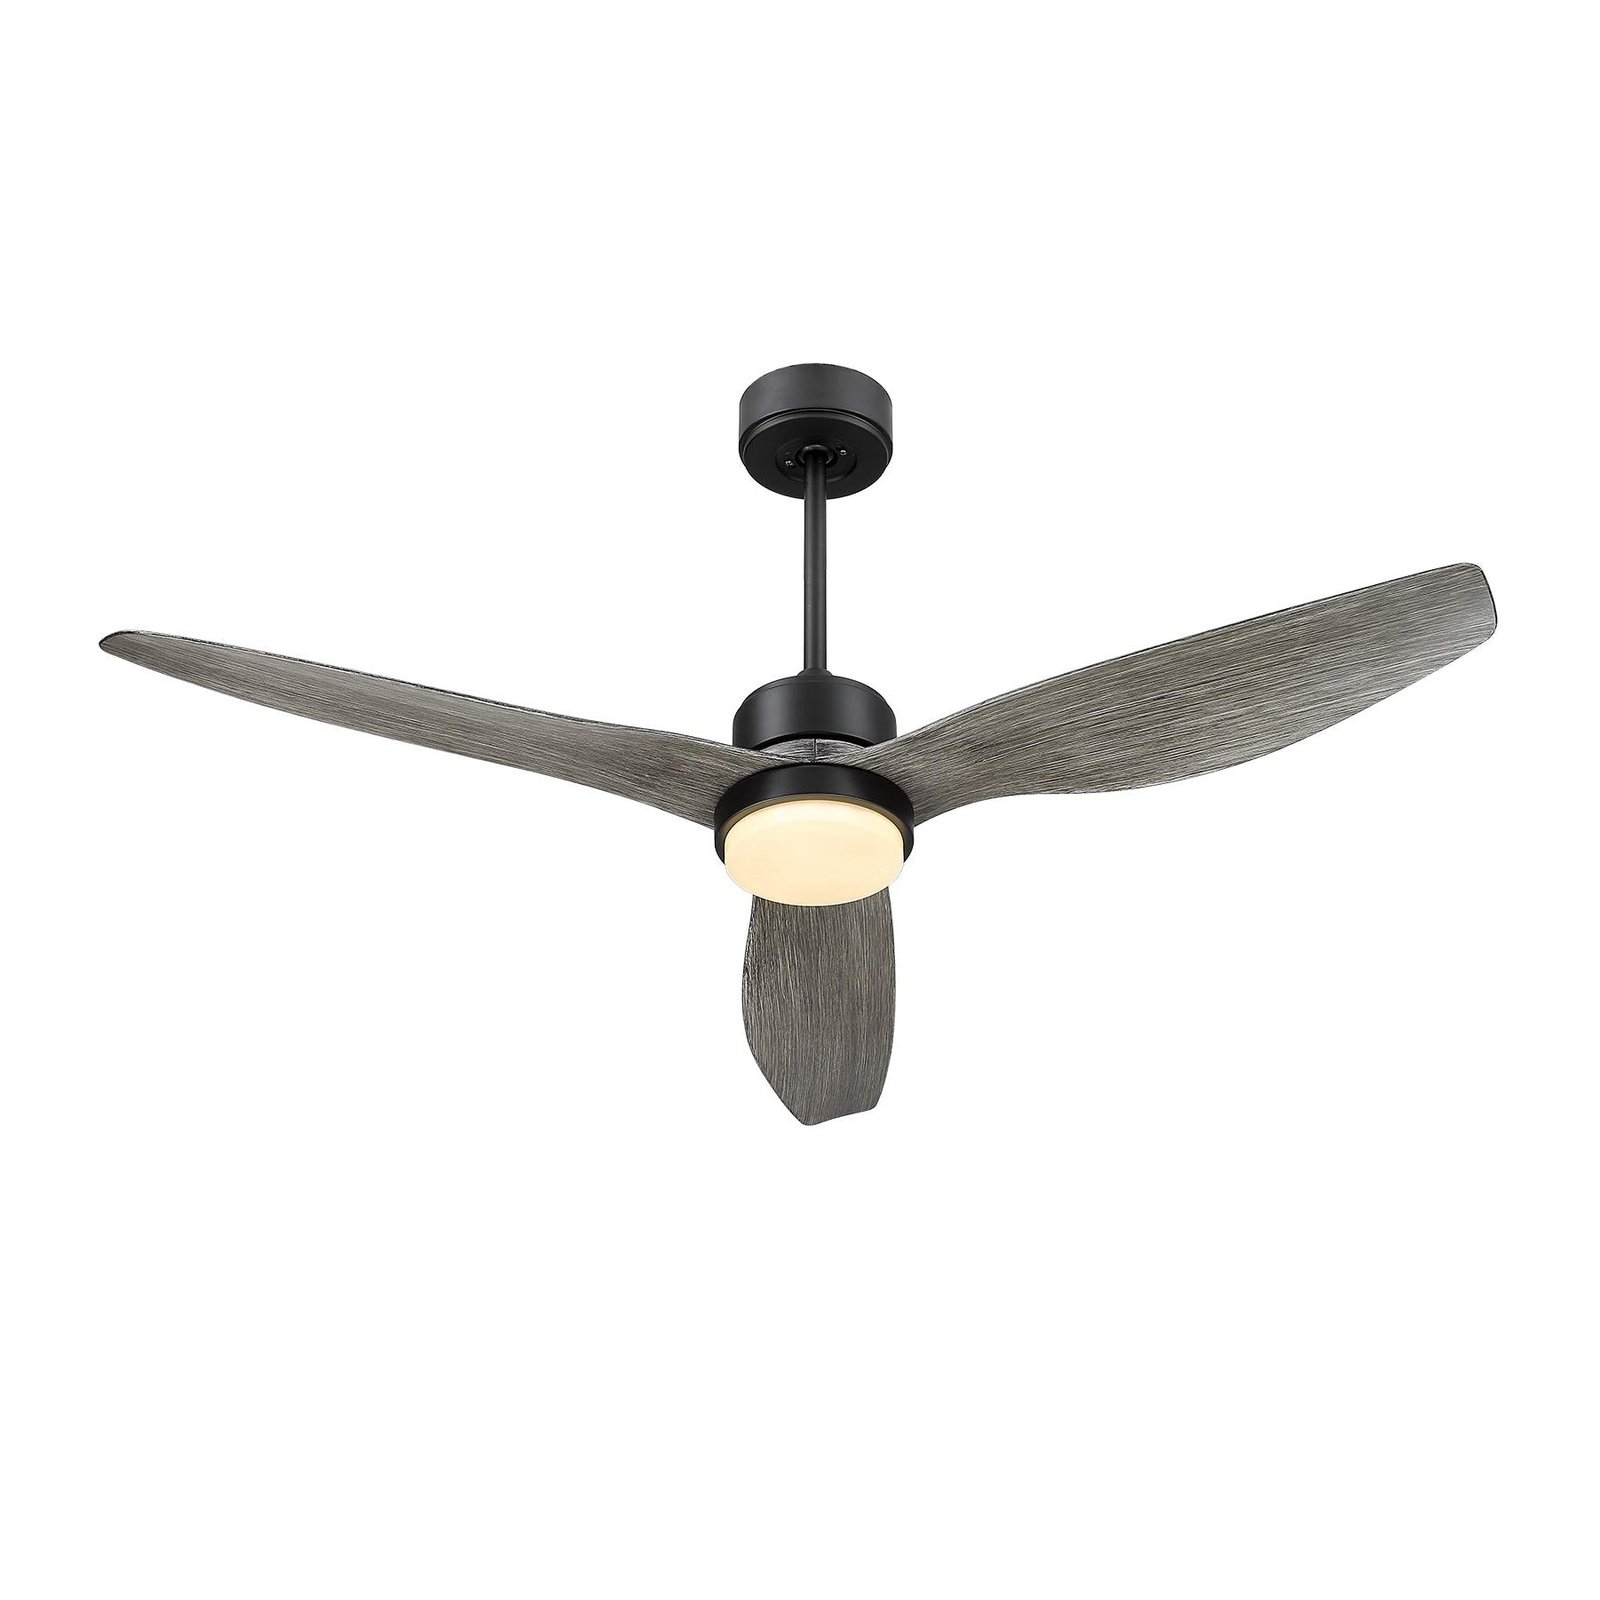 Brown 52-Inch Blade LED Propeller Ceiling Fan with Remote Control, Diameter 52 Inches and Height 17.9 Inches (132cm x 45.4cm), including Remote Control